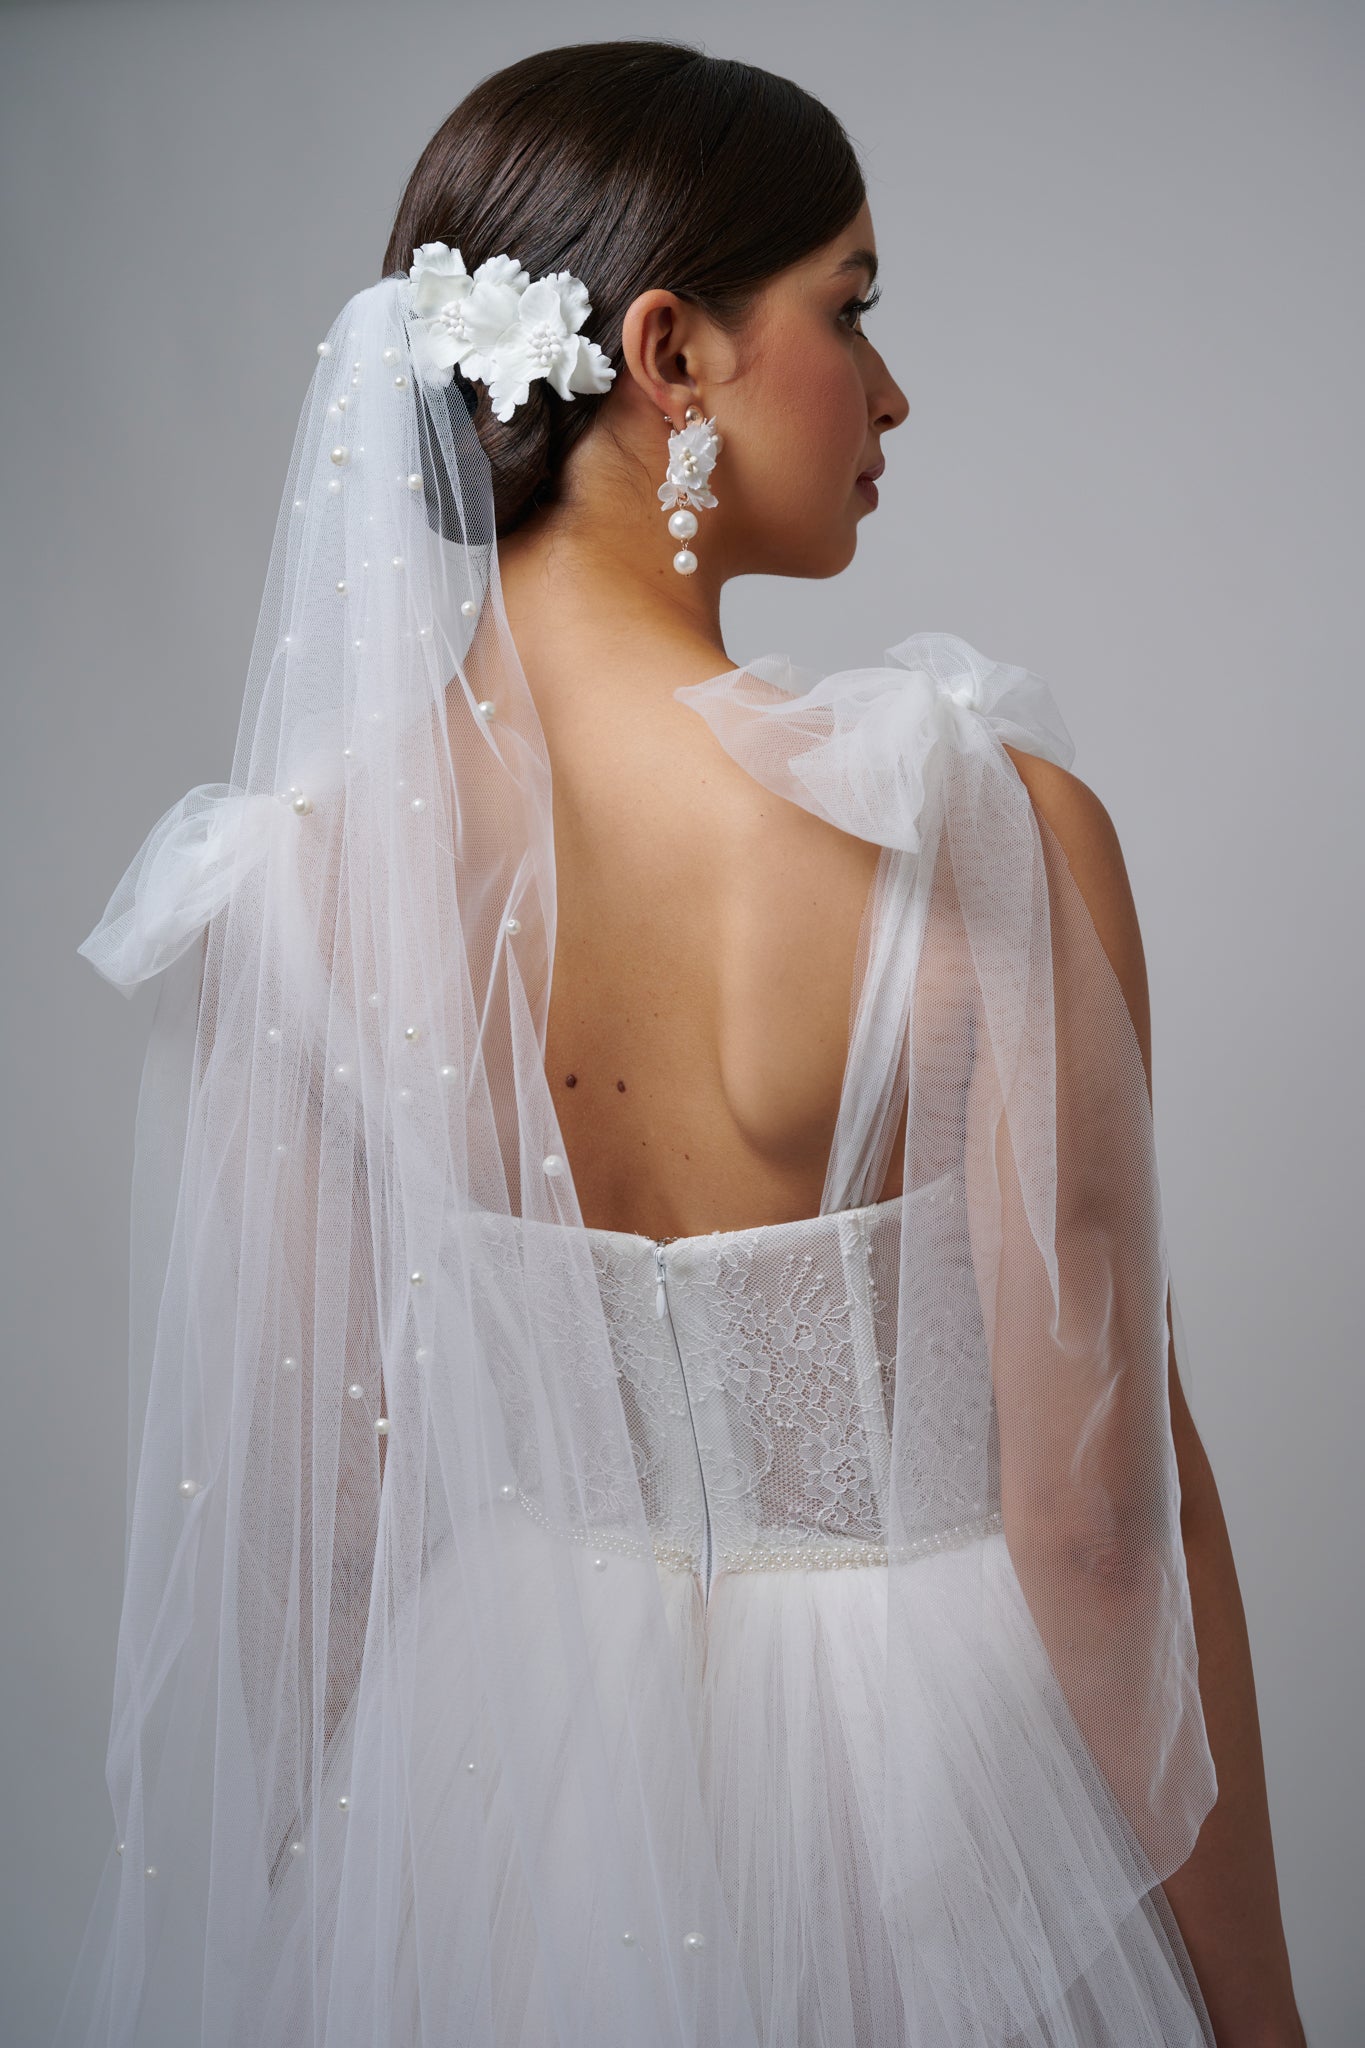 pearl tulle bridal veil in brunette womans hair on her wedding day